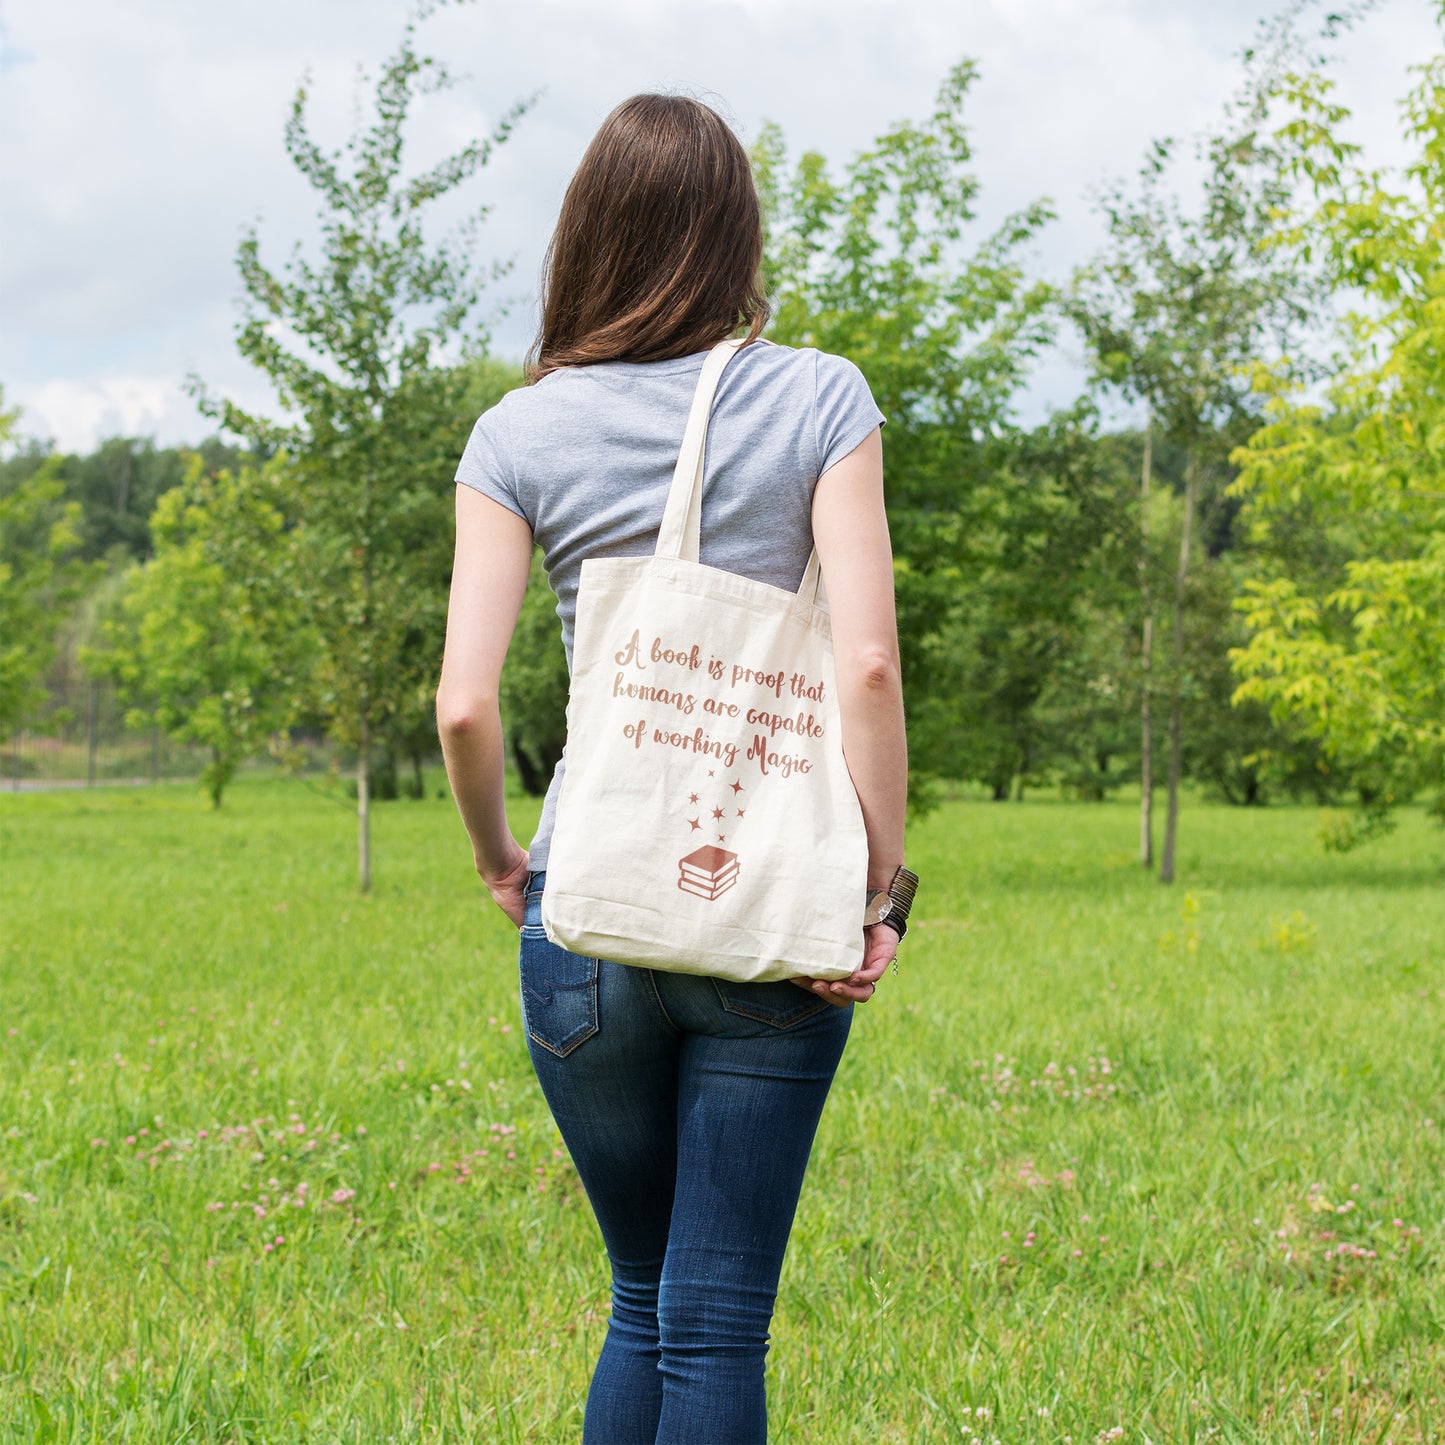 A book is proof that humans are capable of working magic | 100% Organic Cotton tote bag